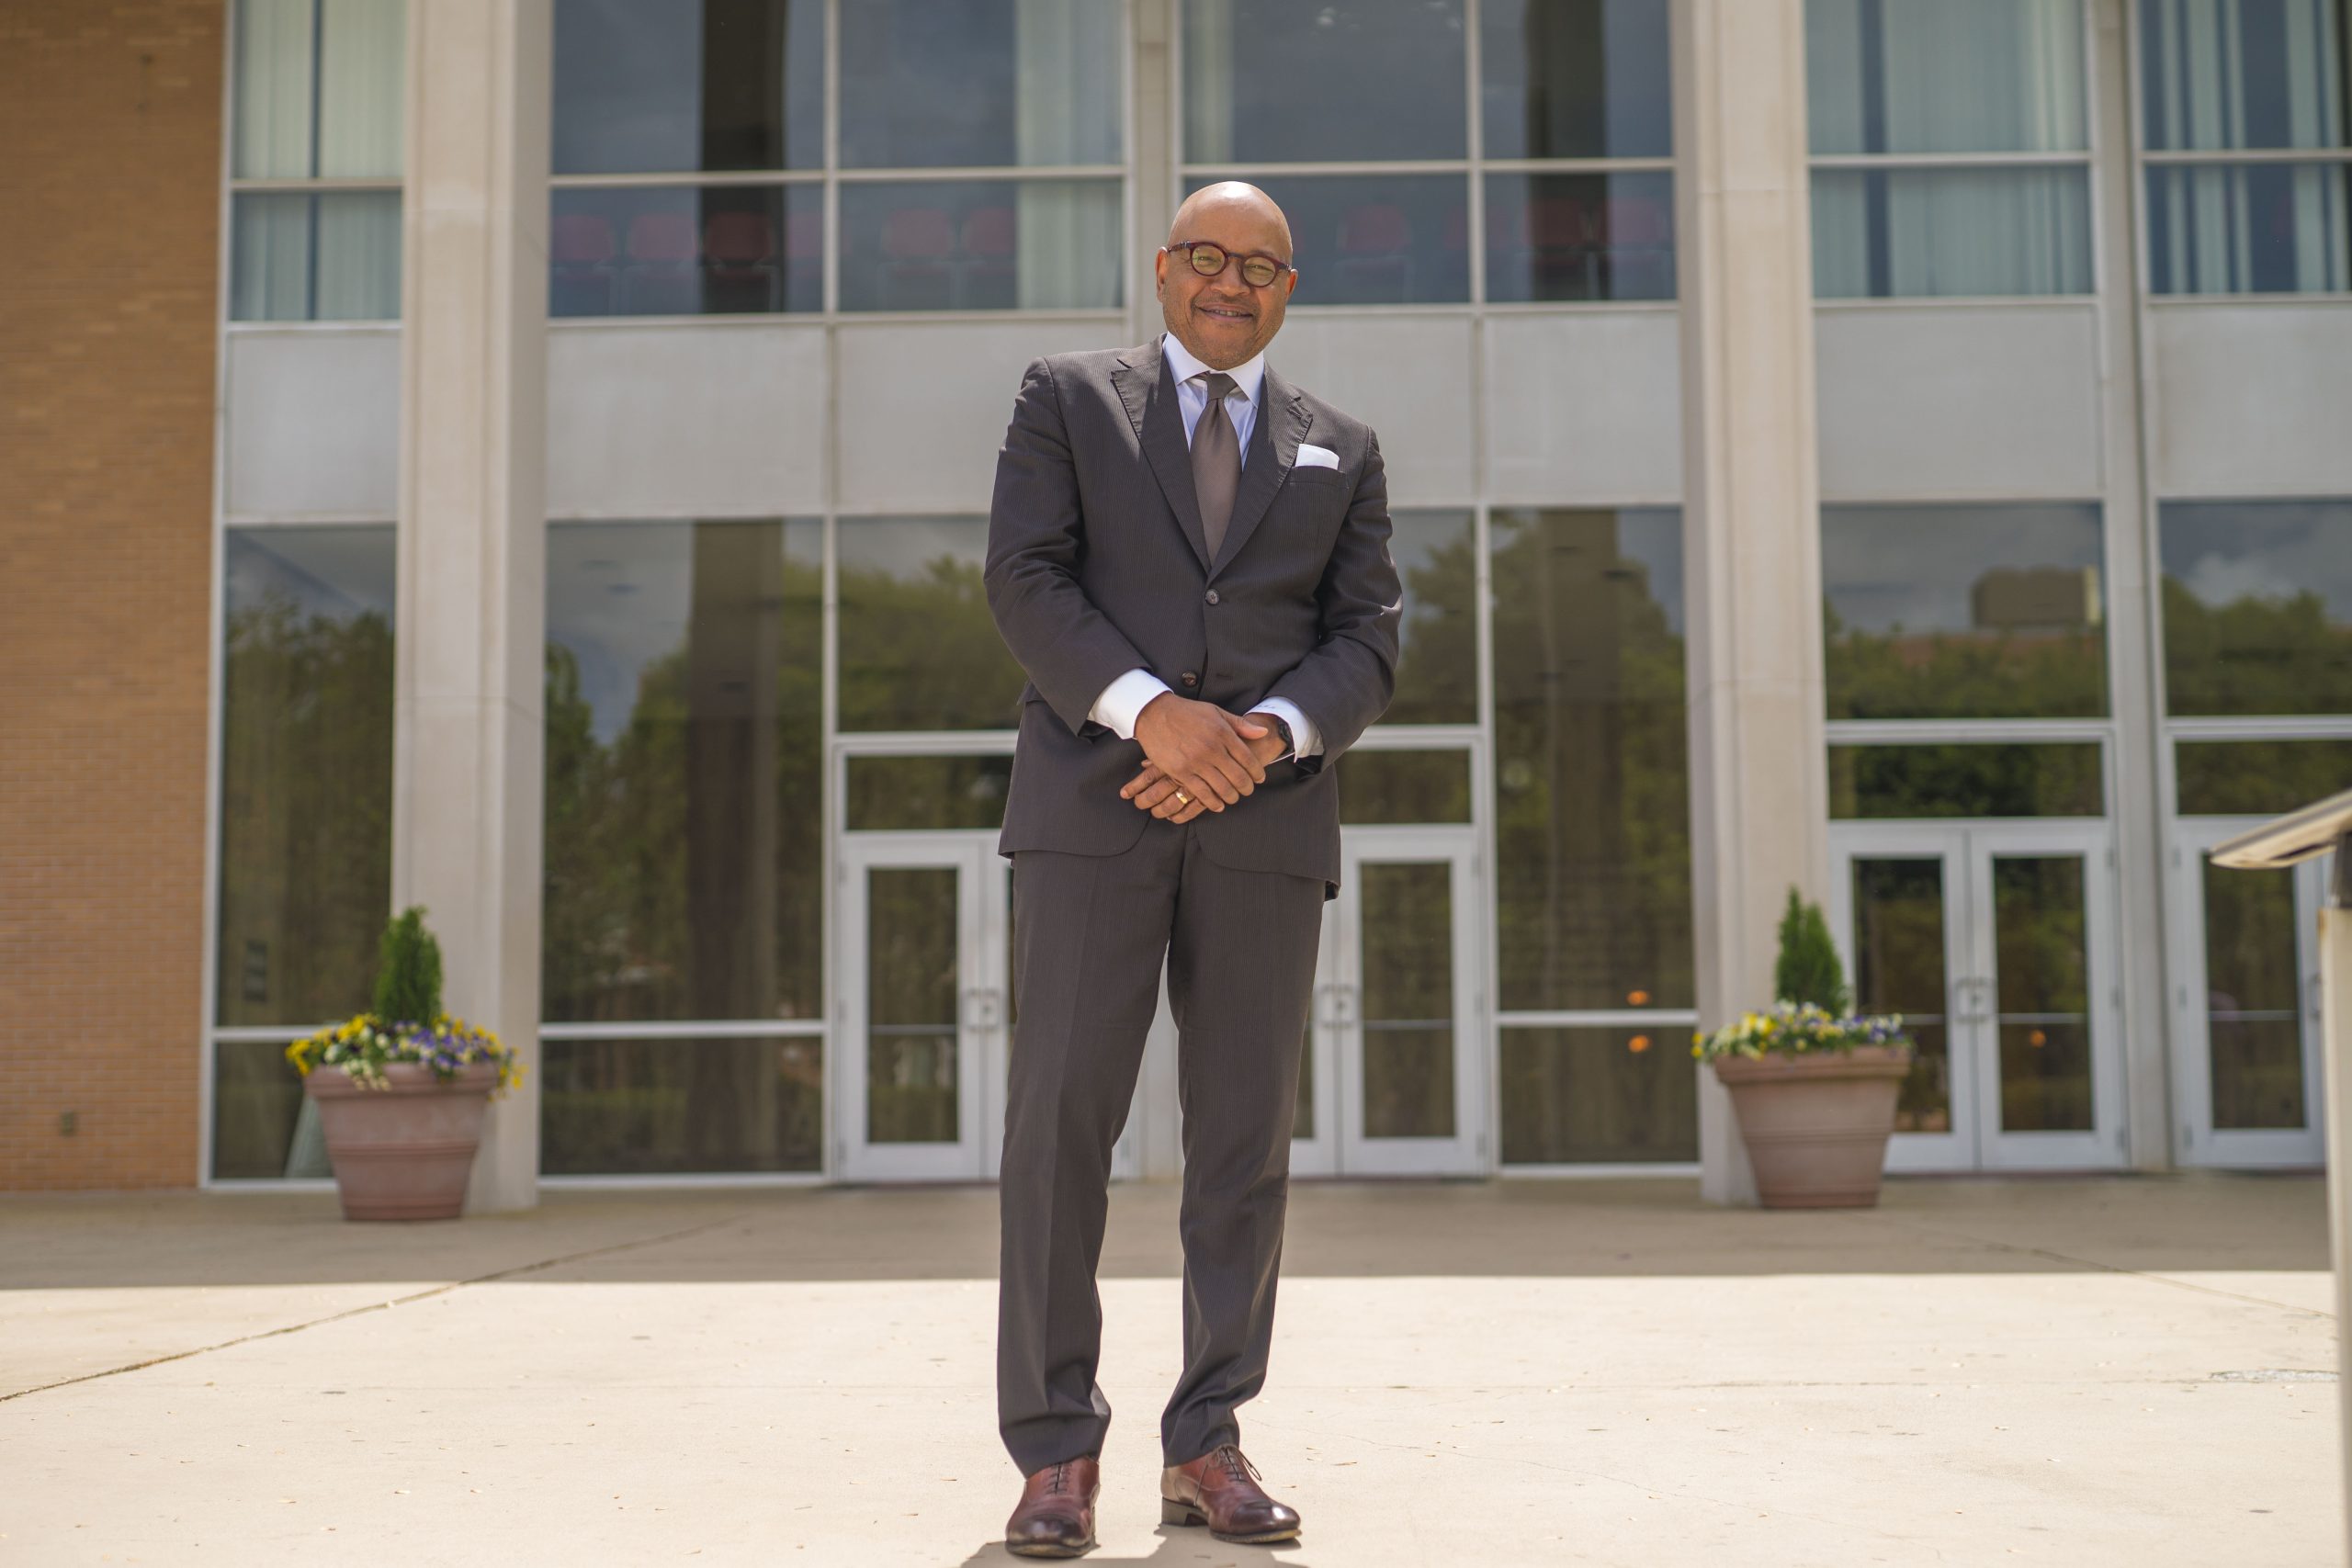 Morehouse President David Thomas Announces Plans To Reopen Campus In Spring 2021 With Hybrid System Of On-Campus, Virtual Learning (Updated 2022)